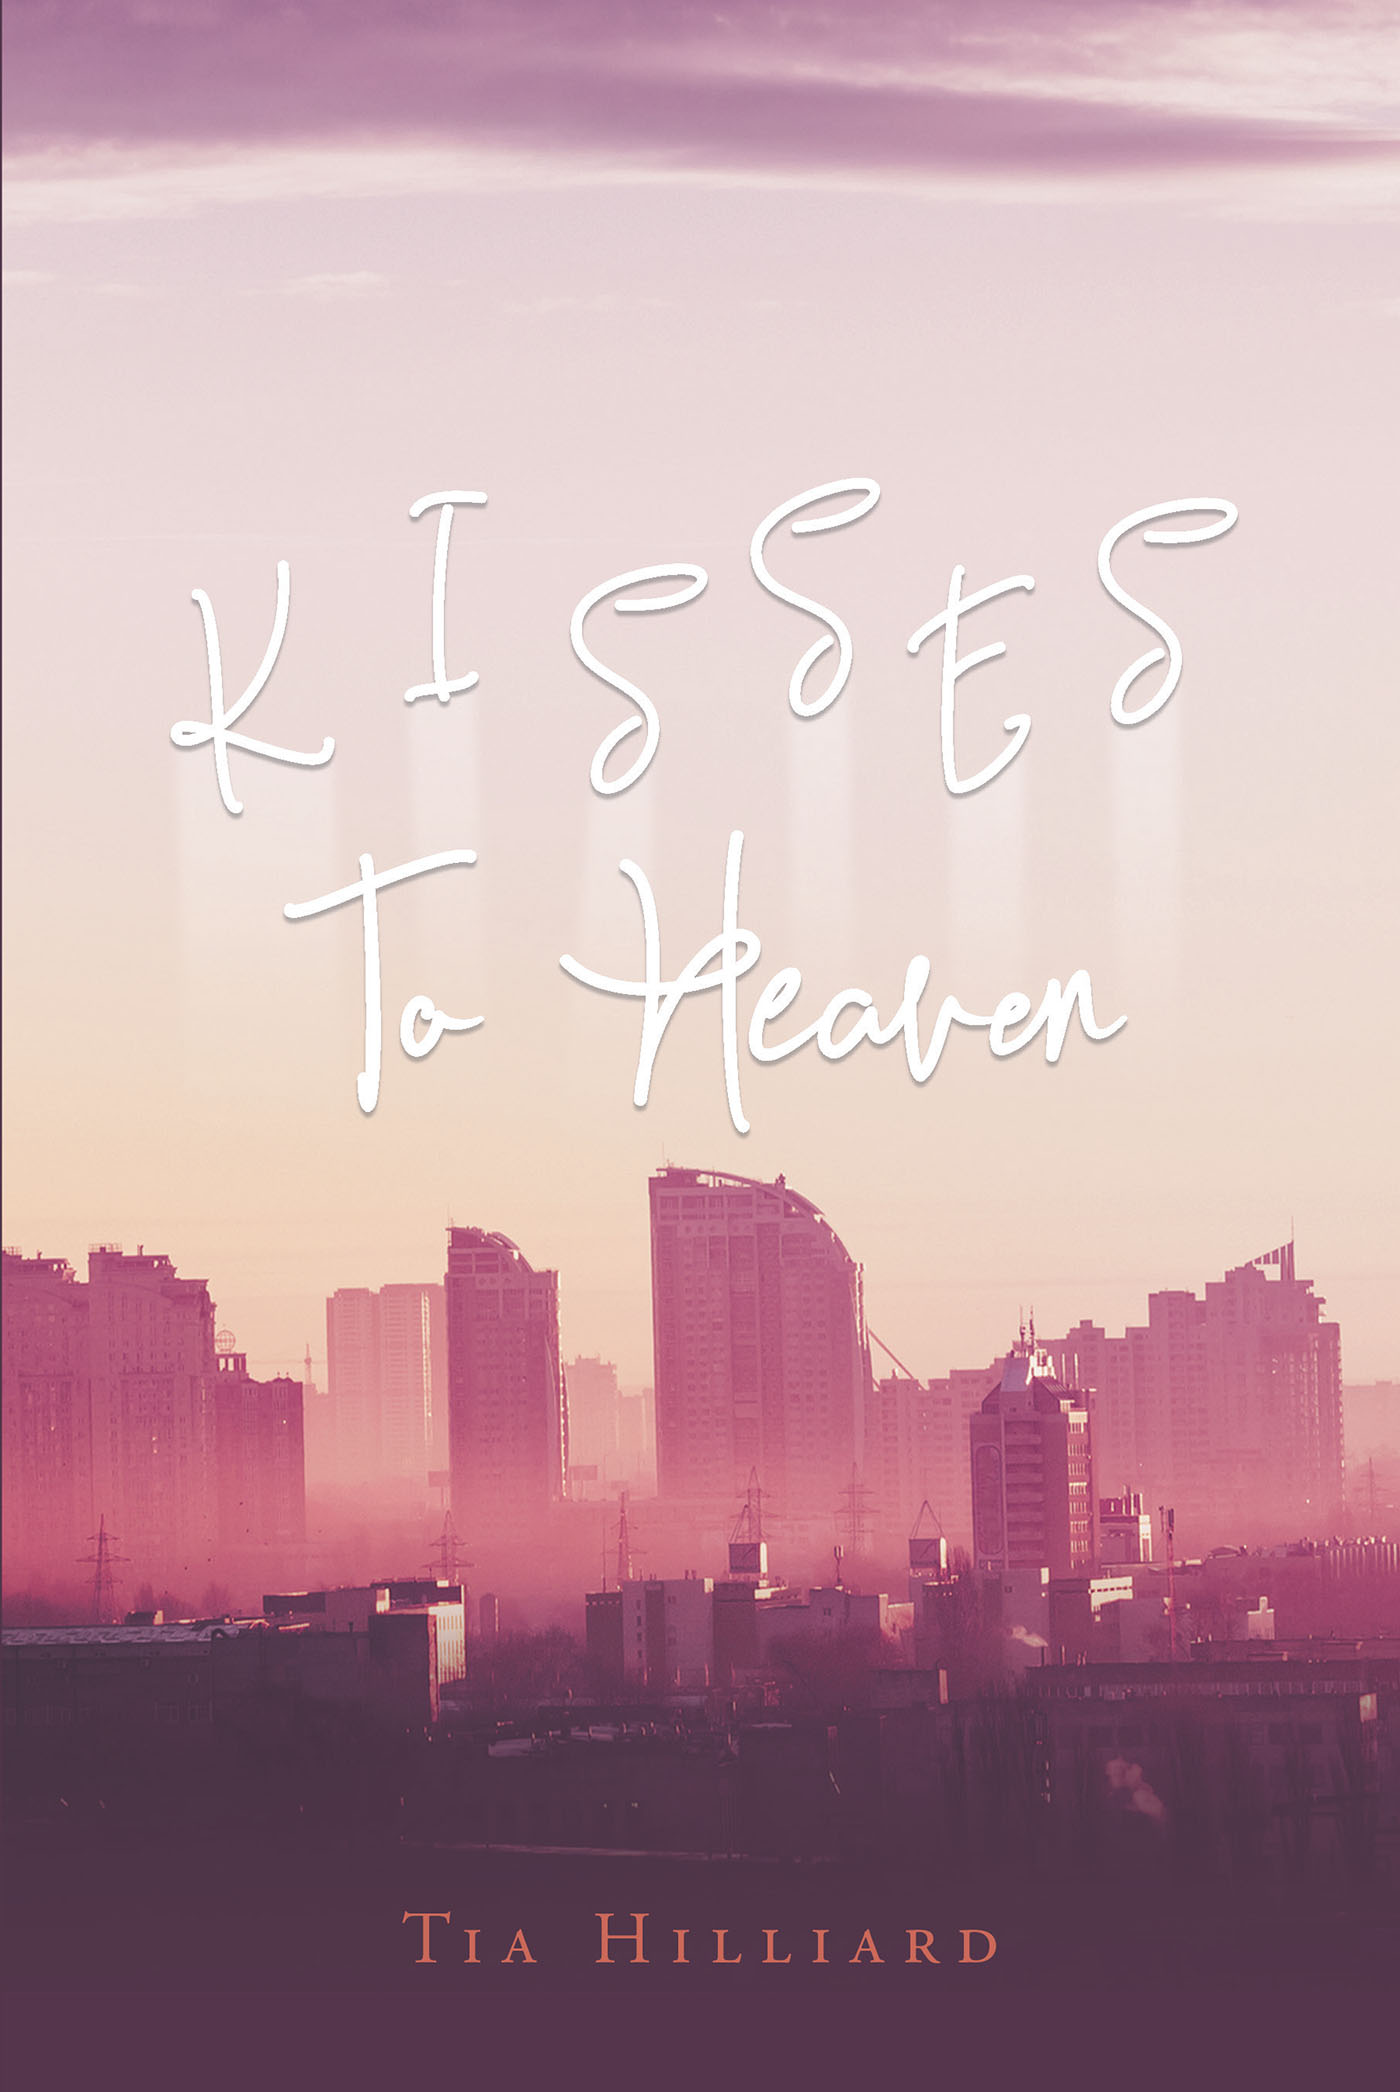 Tia Hilliard’s Newly Released "Kisses To Heaven" is a Celebration of Life That Examines the Complexities of Grief